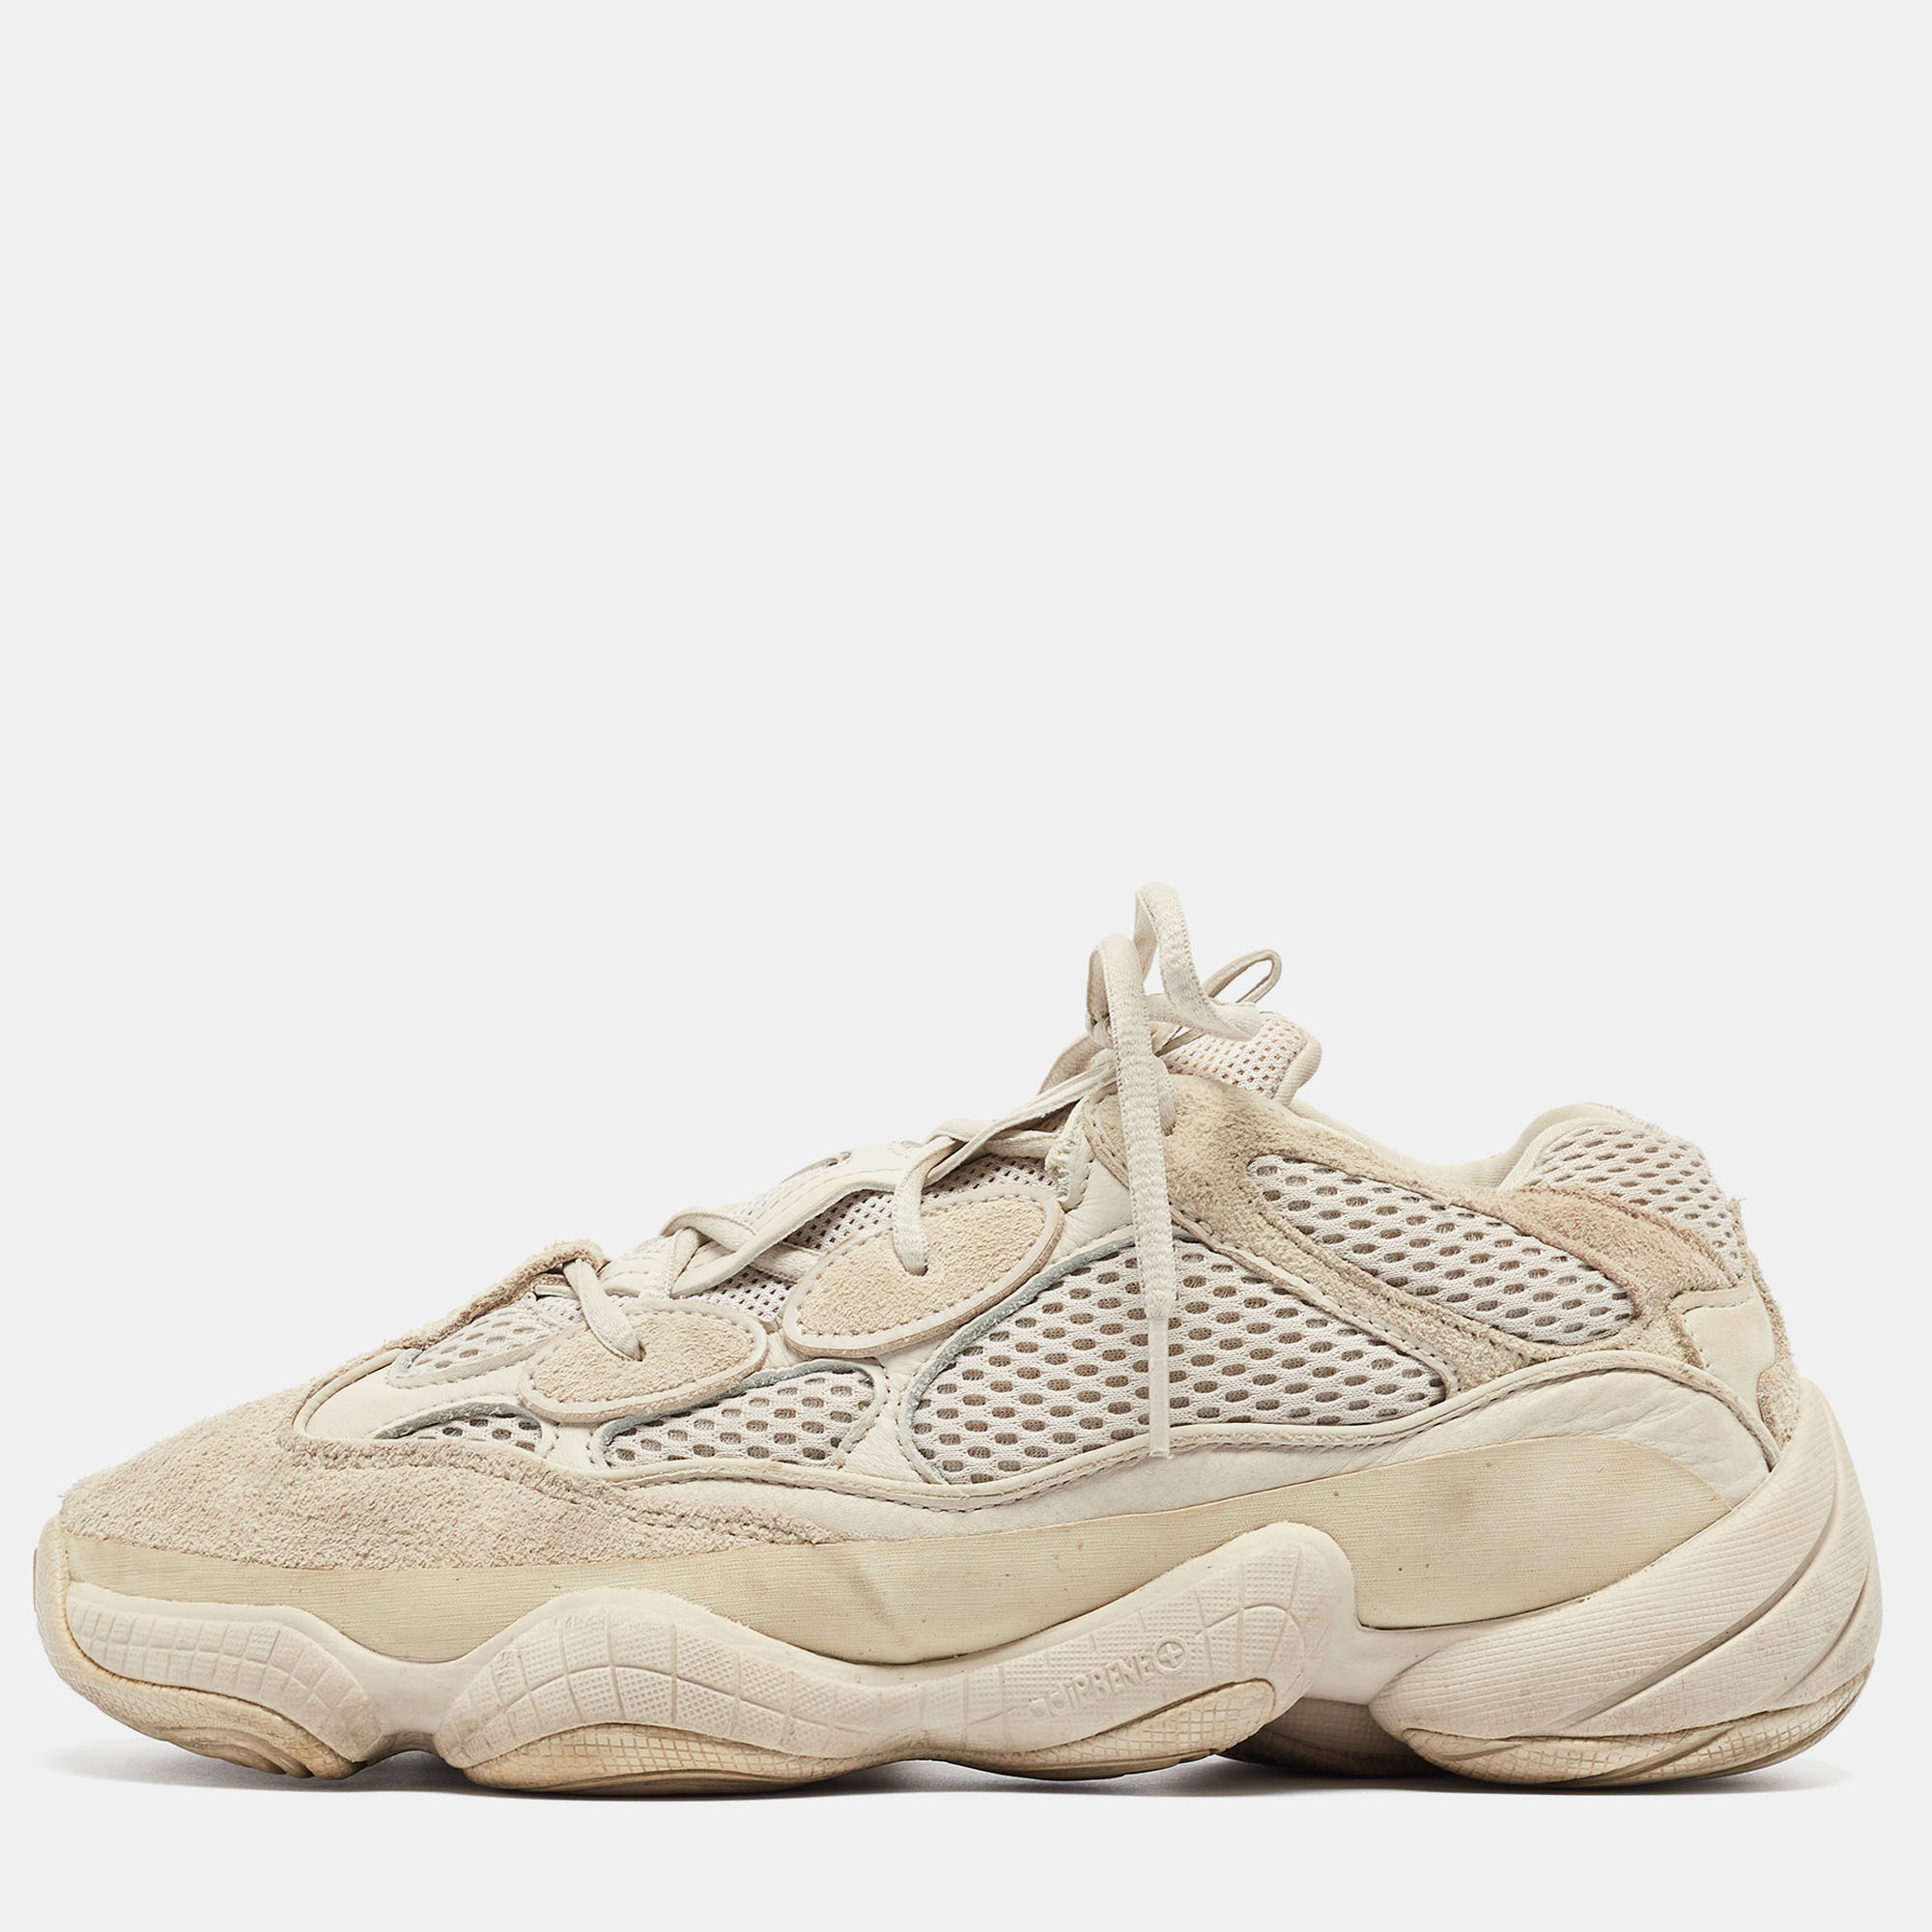 Yeezy x adidas grey suede and leather yeezy 500 sneakers size 42